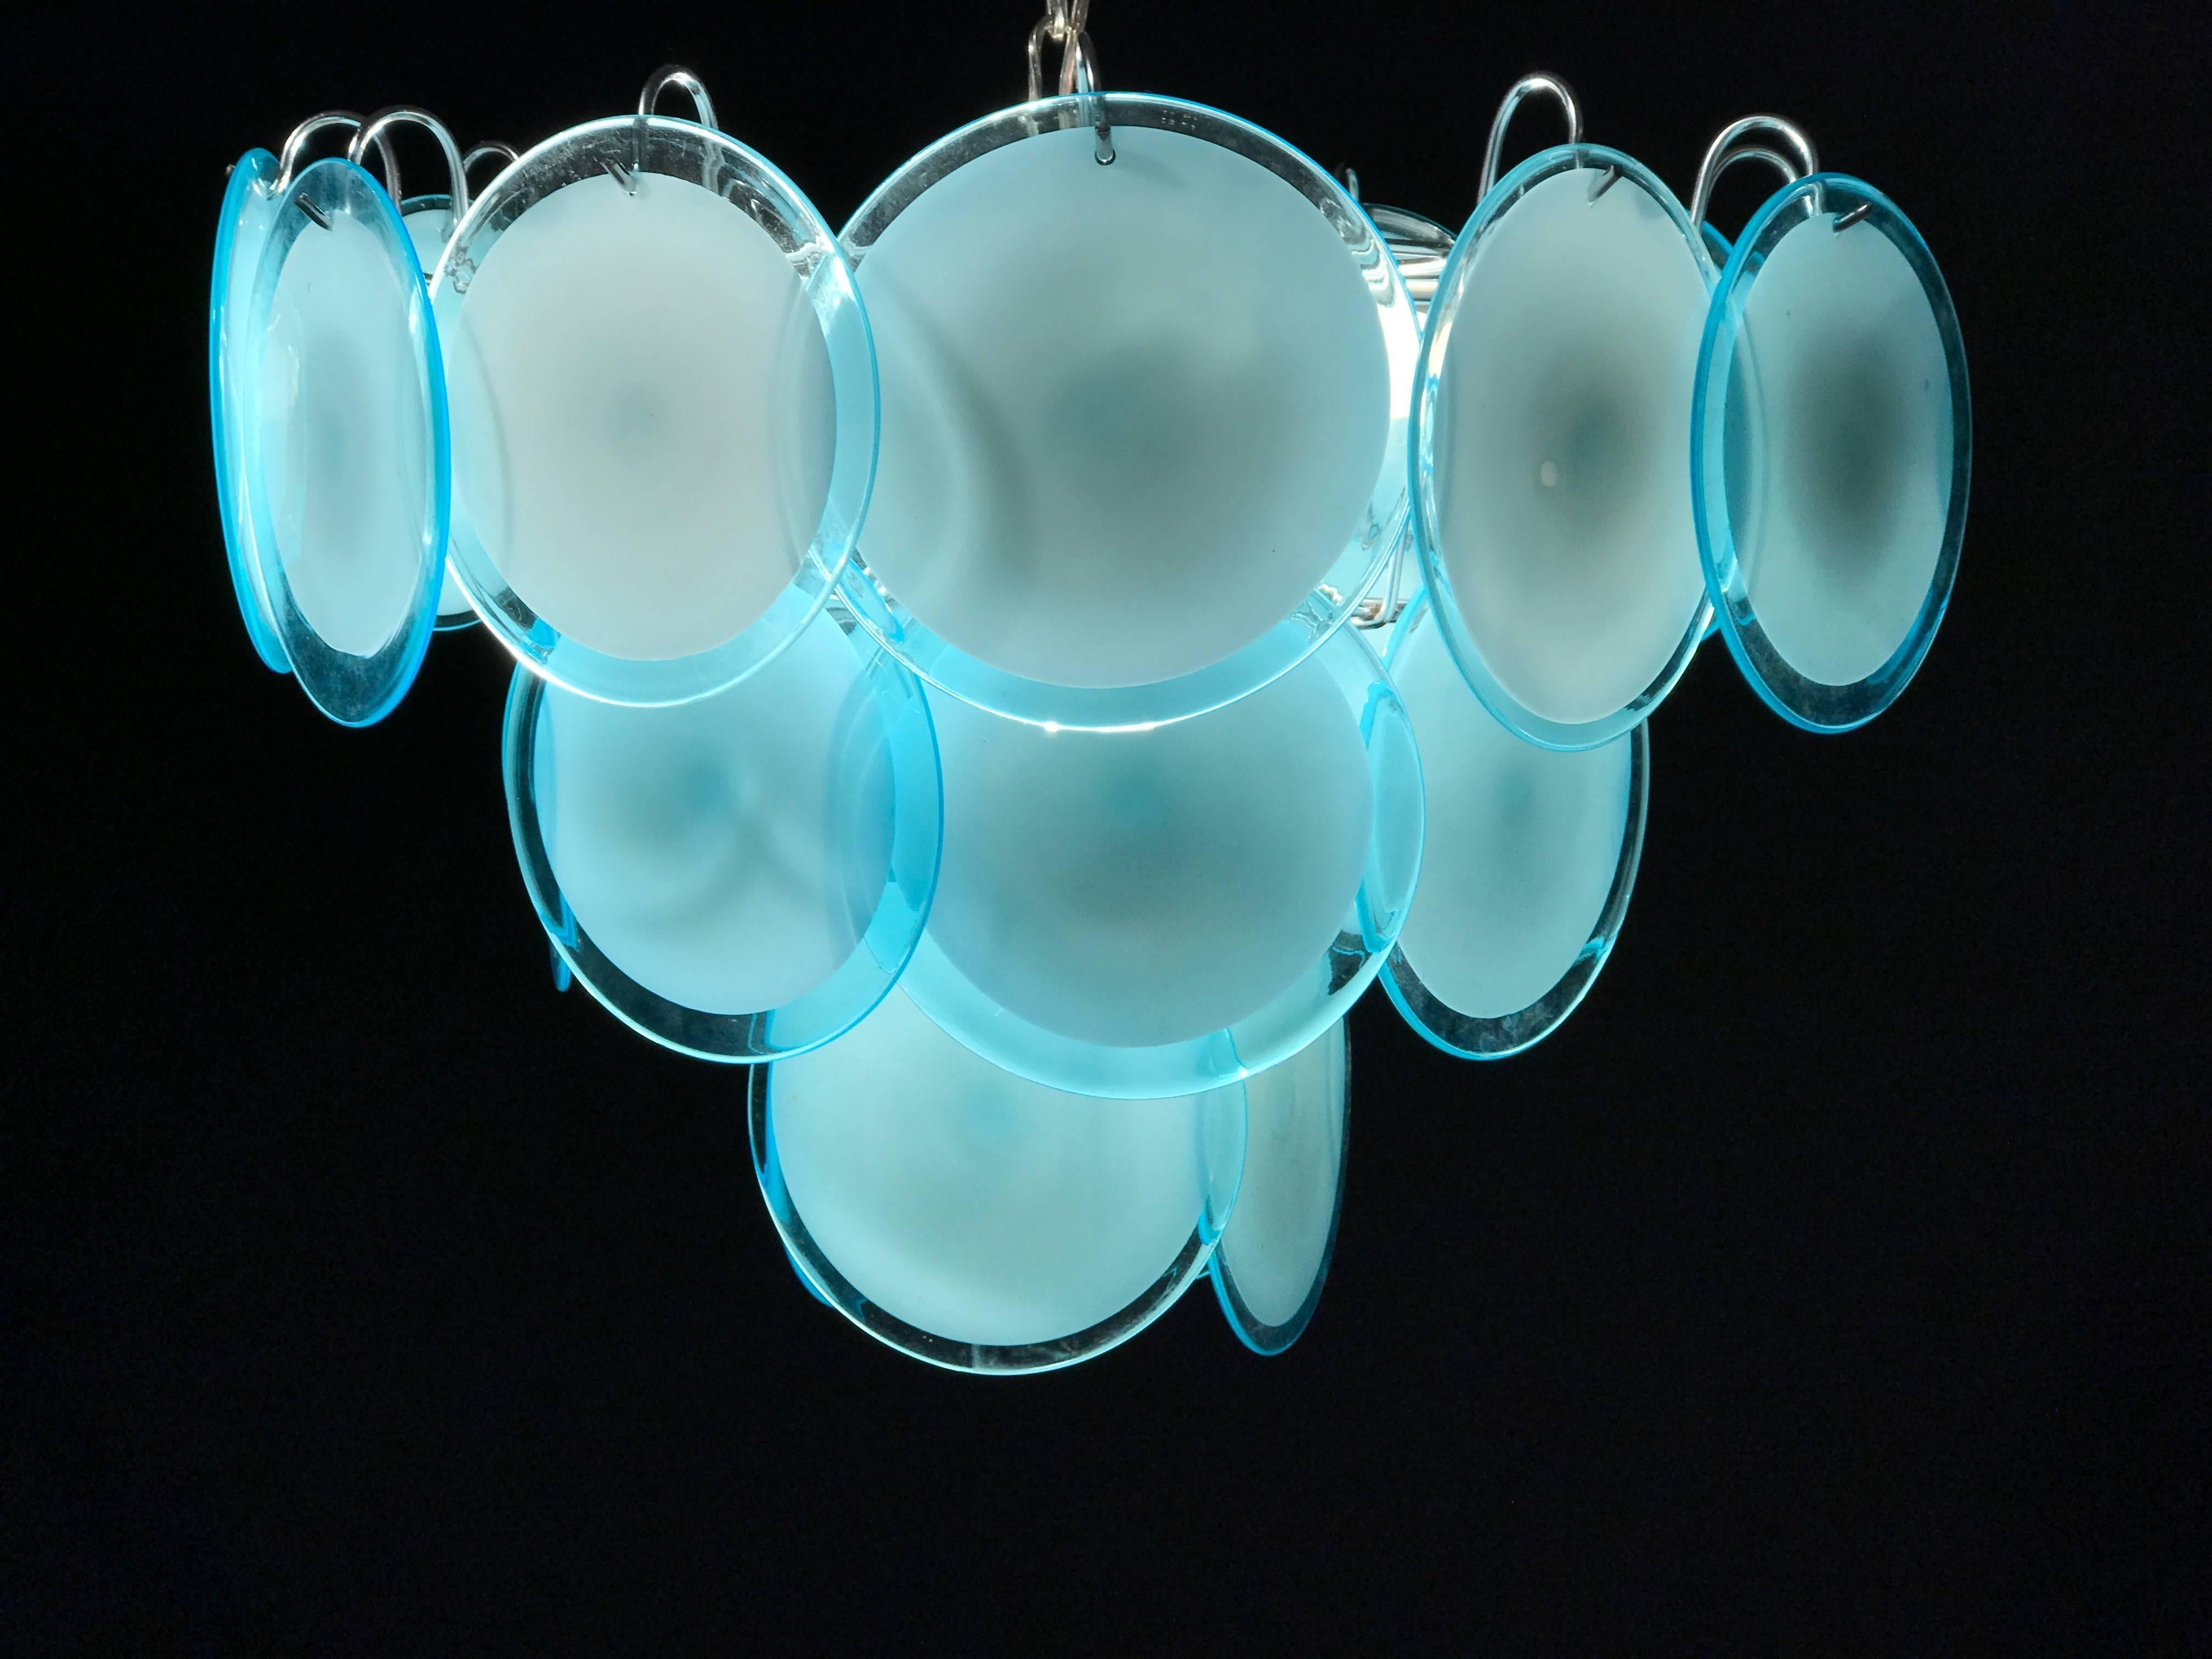 The rare 24 turquoise discs of precious Murano glass are arranged on floor levels.
Nine E14 light bulbs.
Measures: Height without chain 40 cm.